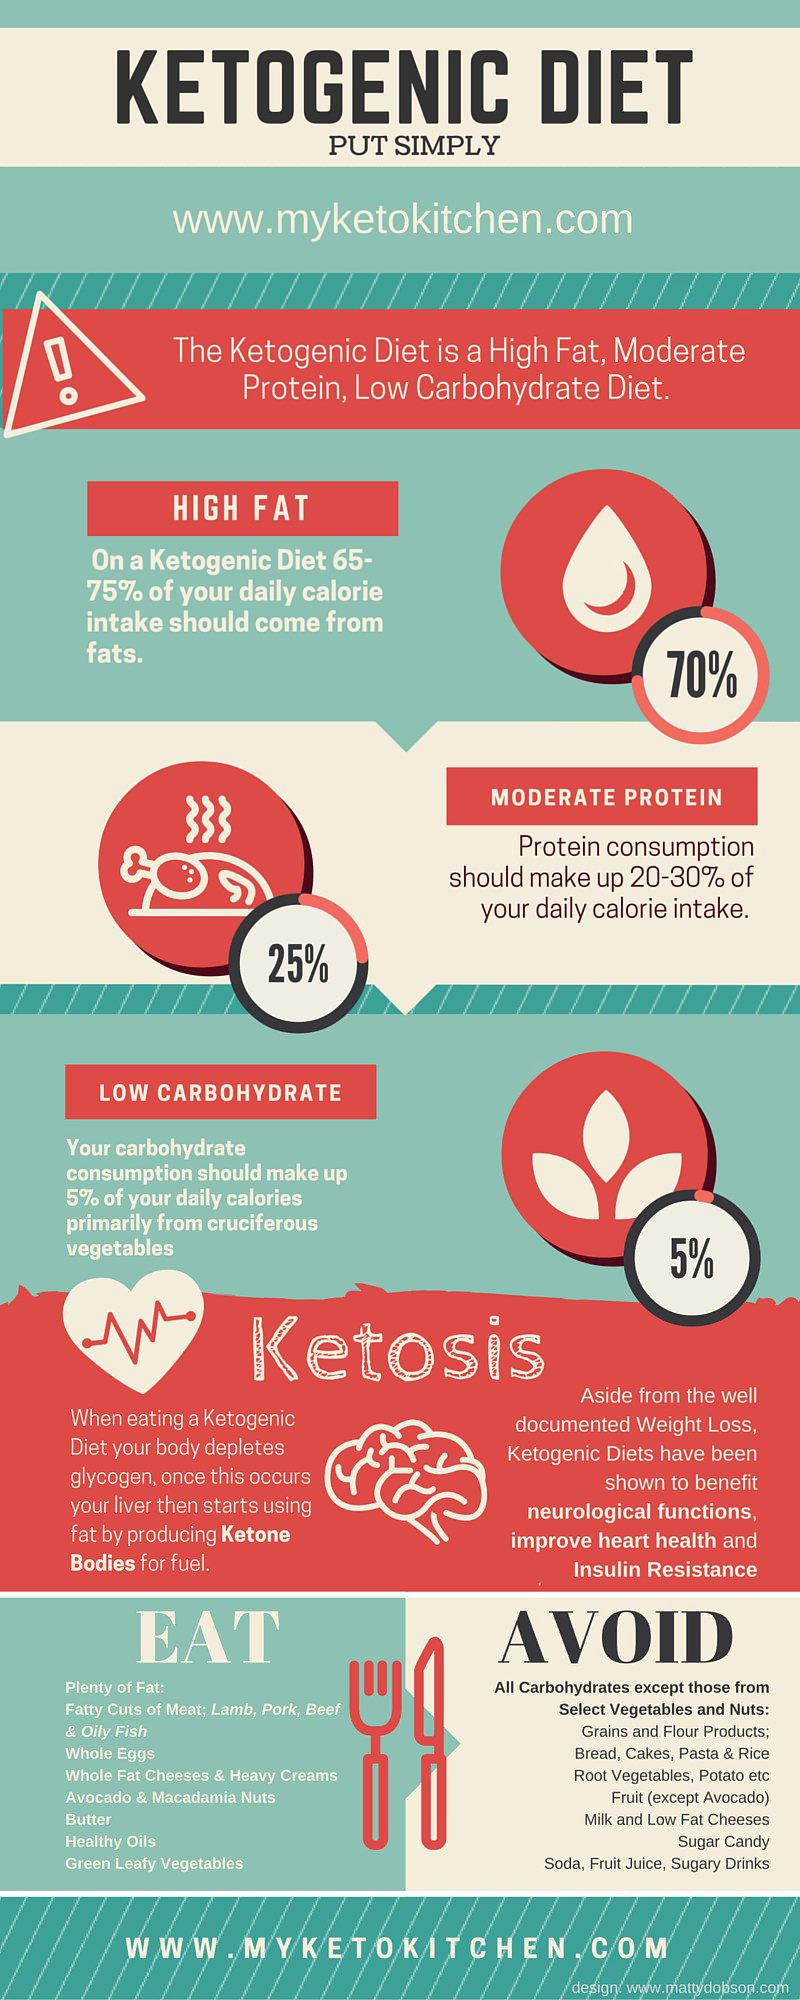 Low Cholesterol Keto Diet
 Going Ketogenic It’s a Lifestyle Not a Diet Food